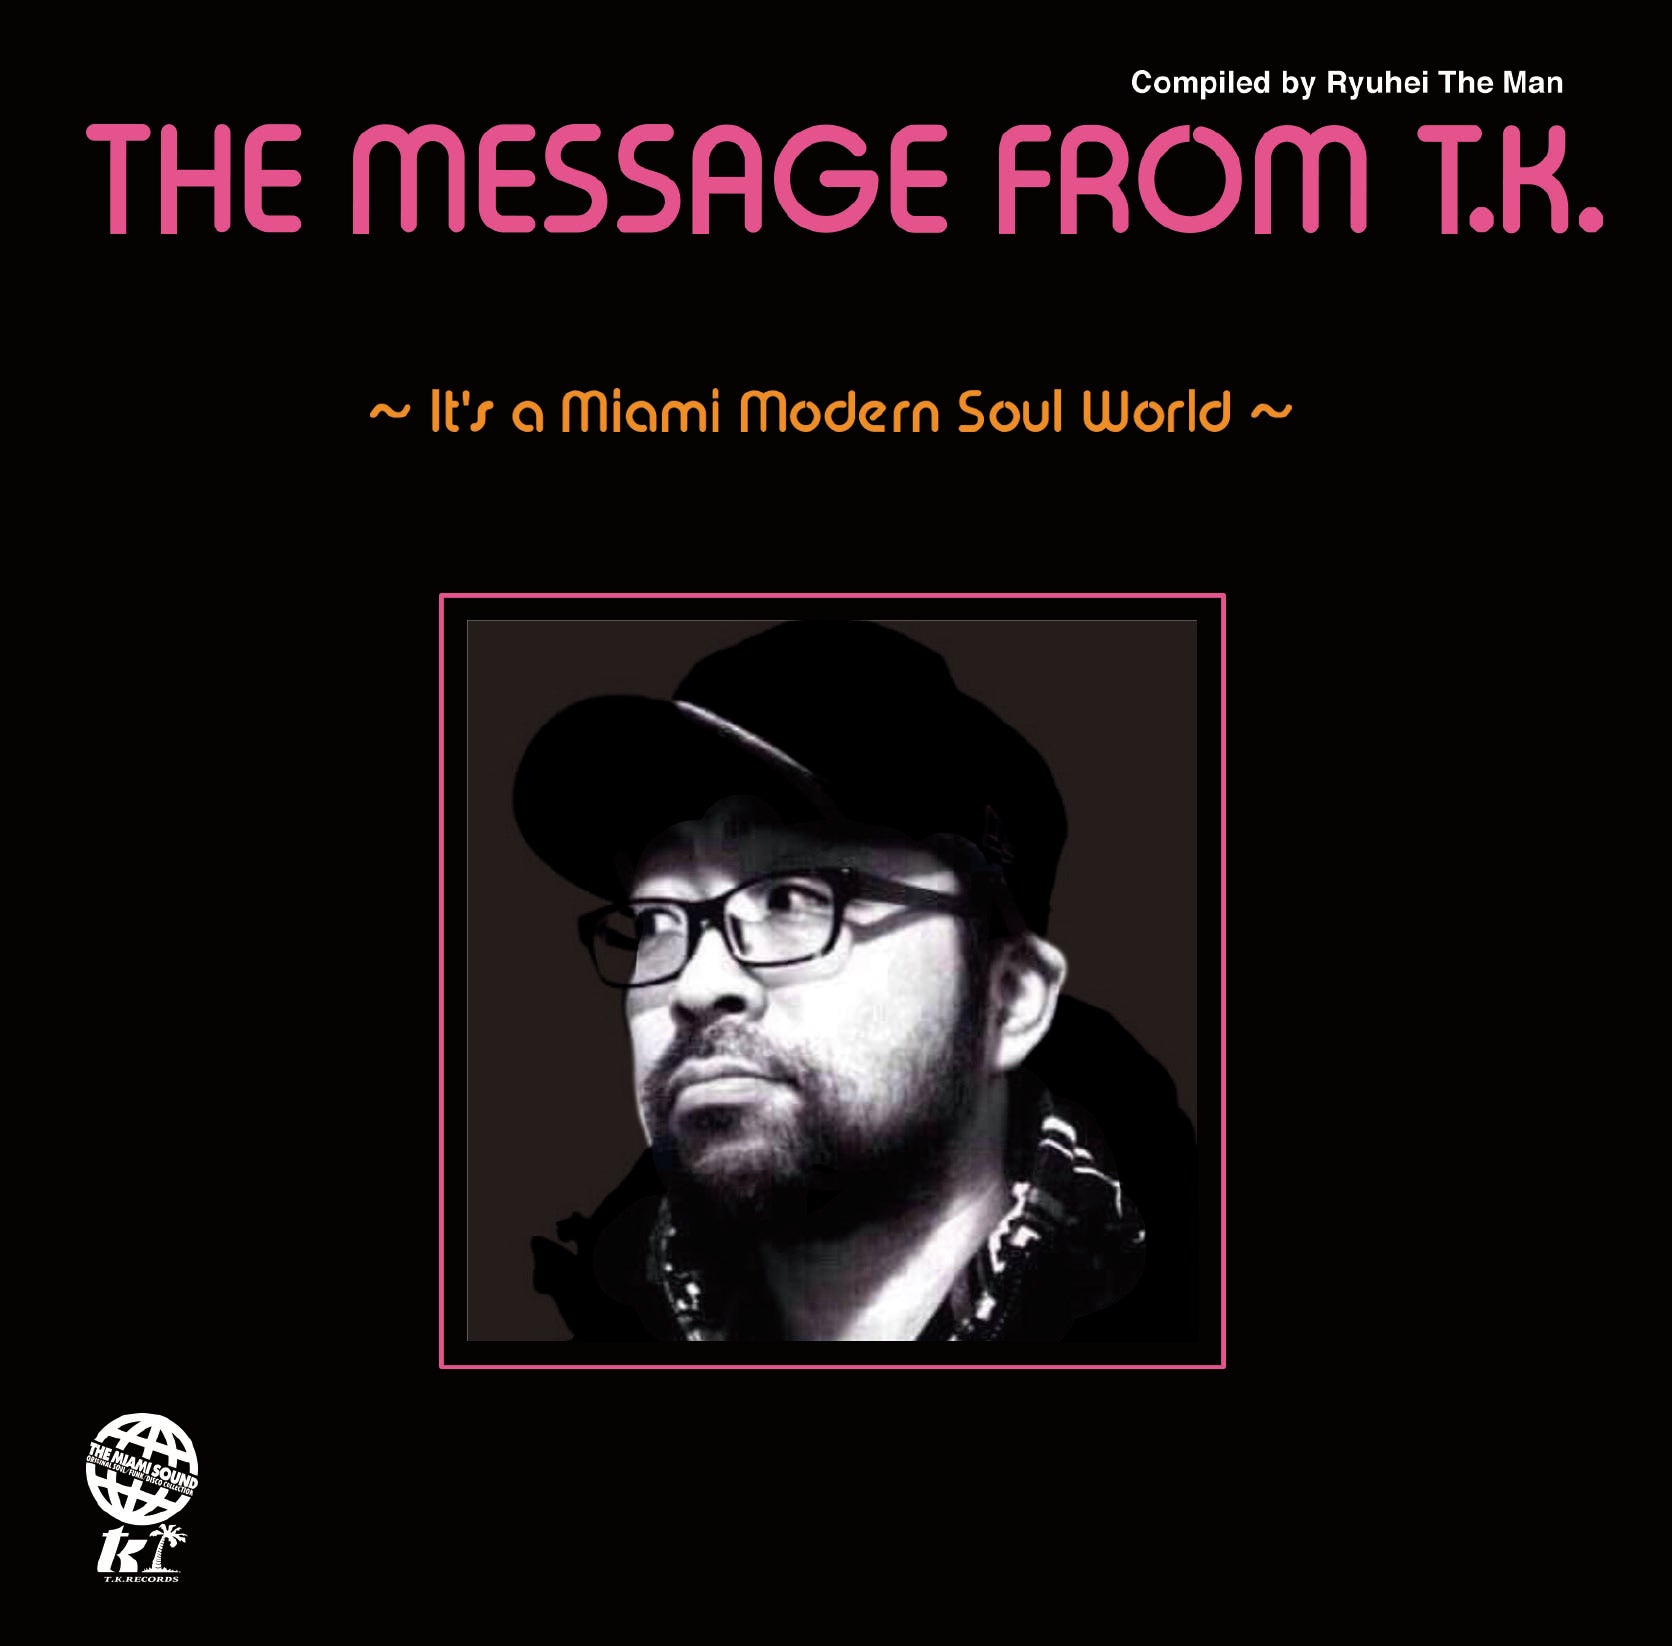 THE MESSAGE FROM T.K. ～IT'S A MIAMI MODERN SOUL WORLD～